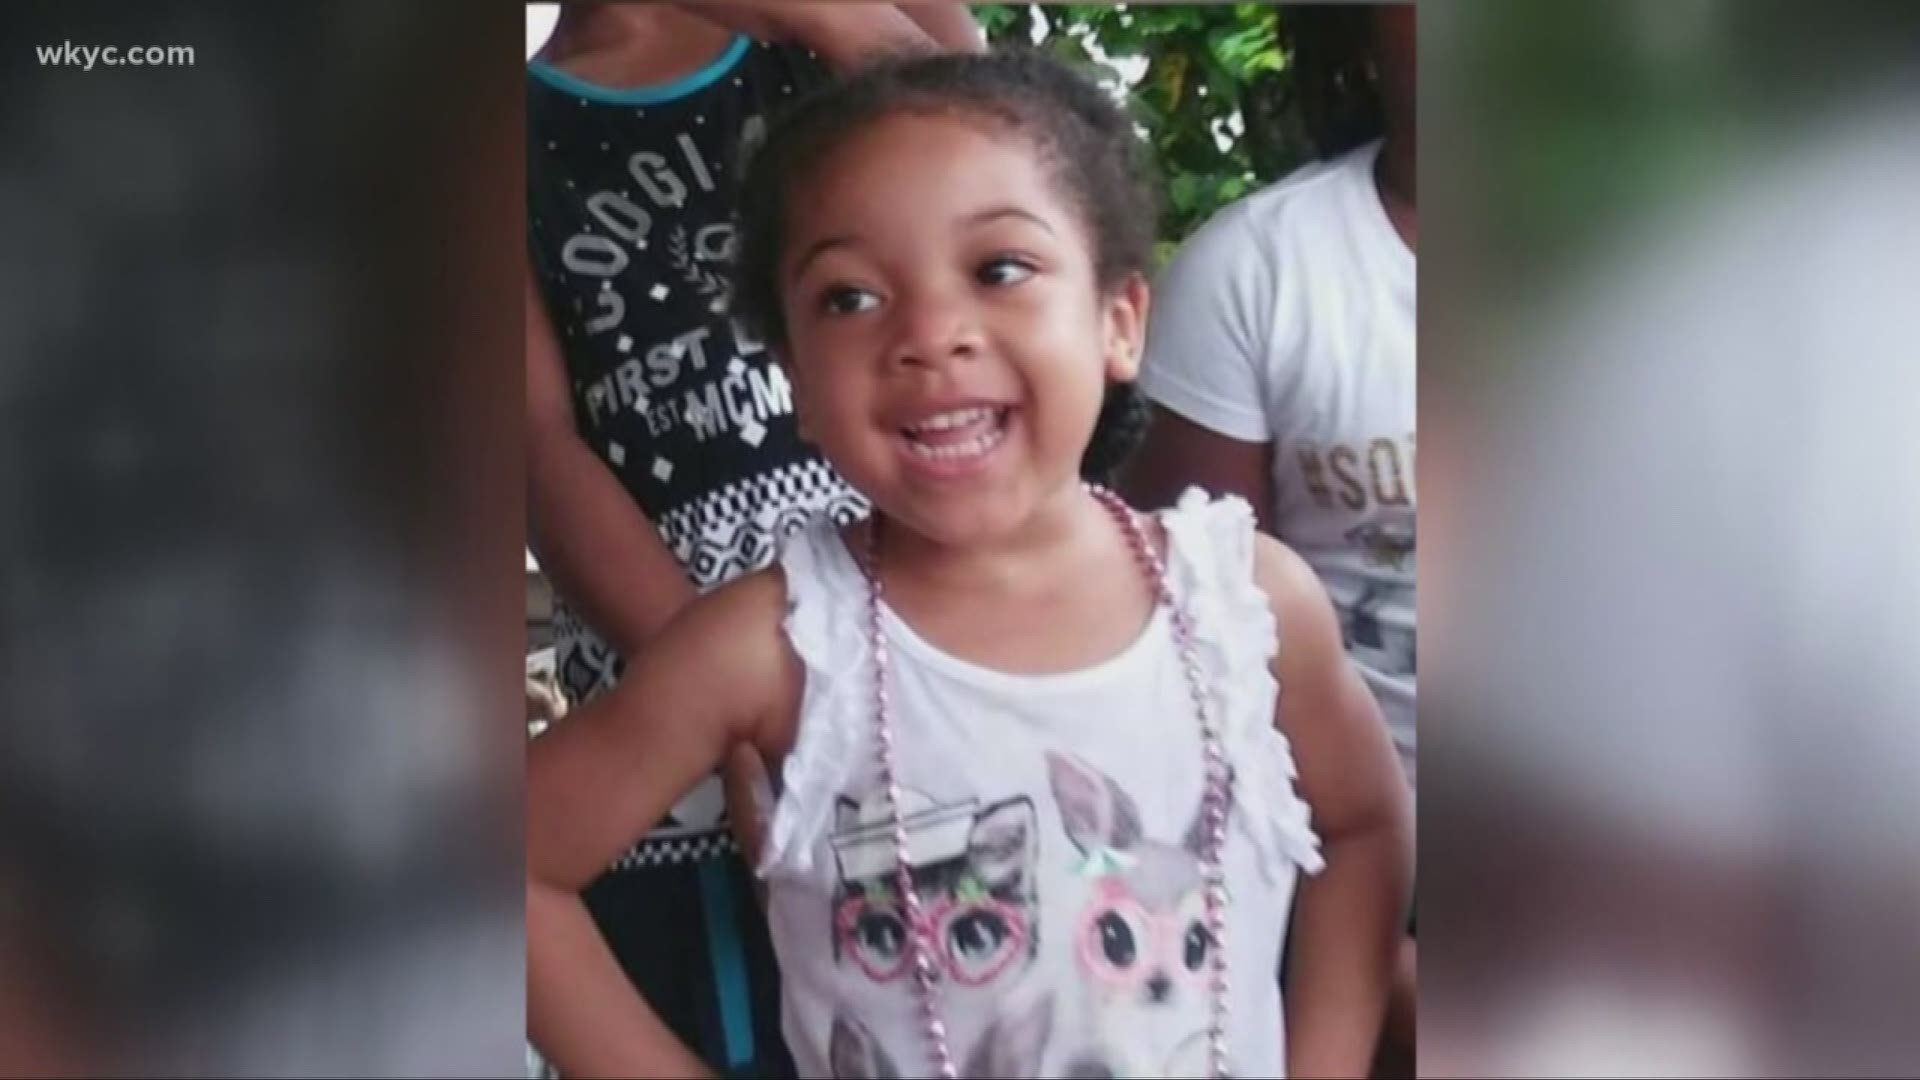 Cuyahoga County announces changes to children's services following death of 4-year-old girl